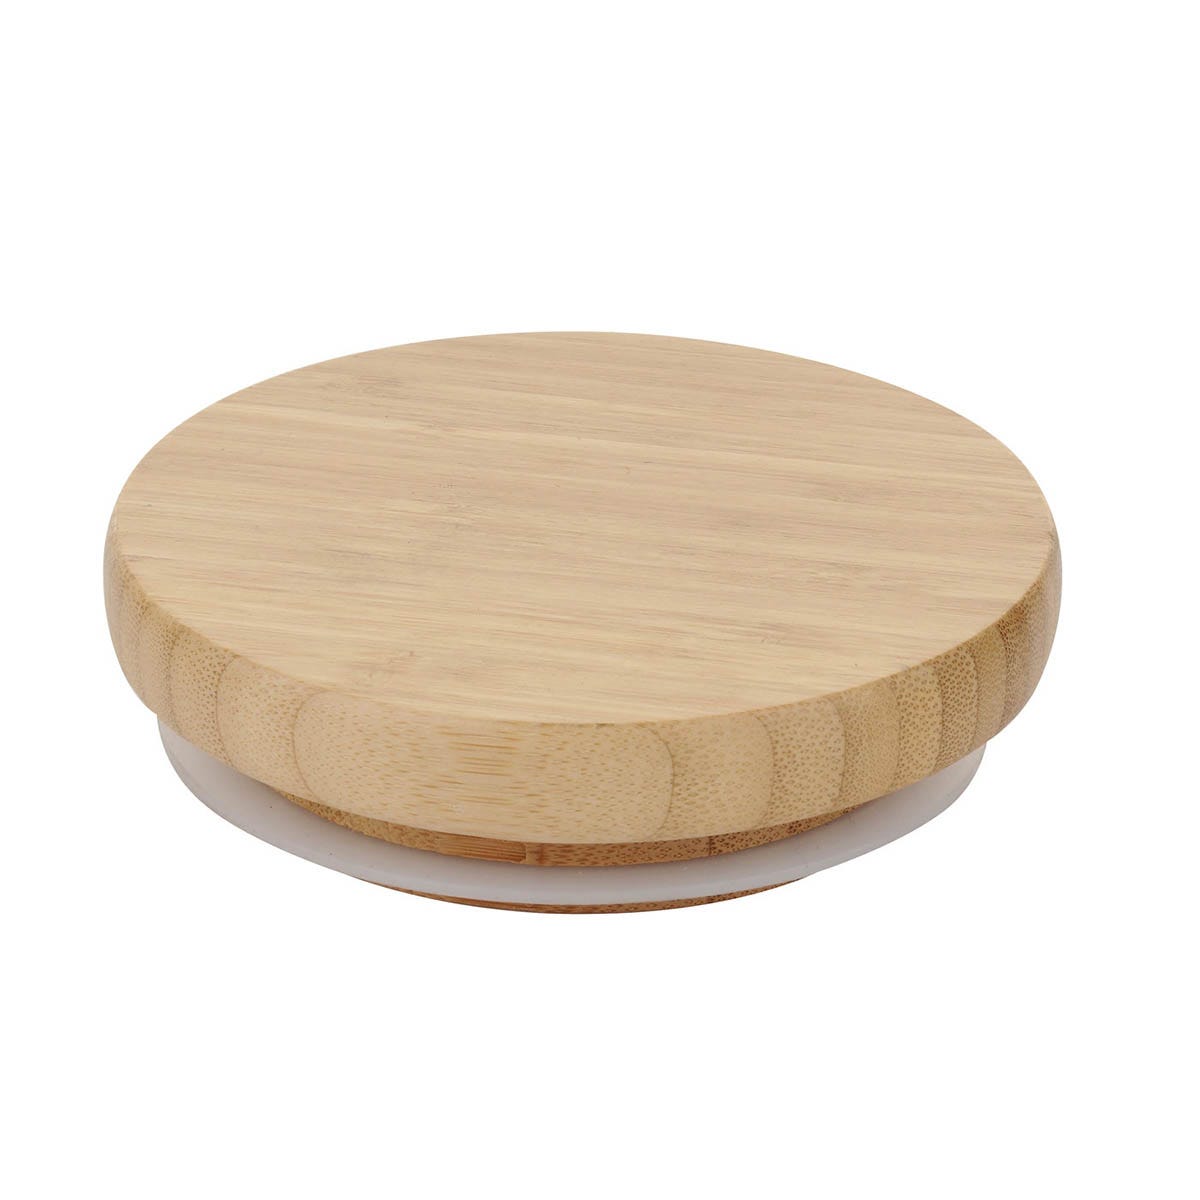 SPARE PART 4.5 Inch Wooden LID ONLY